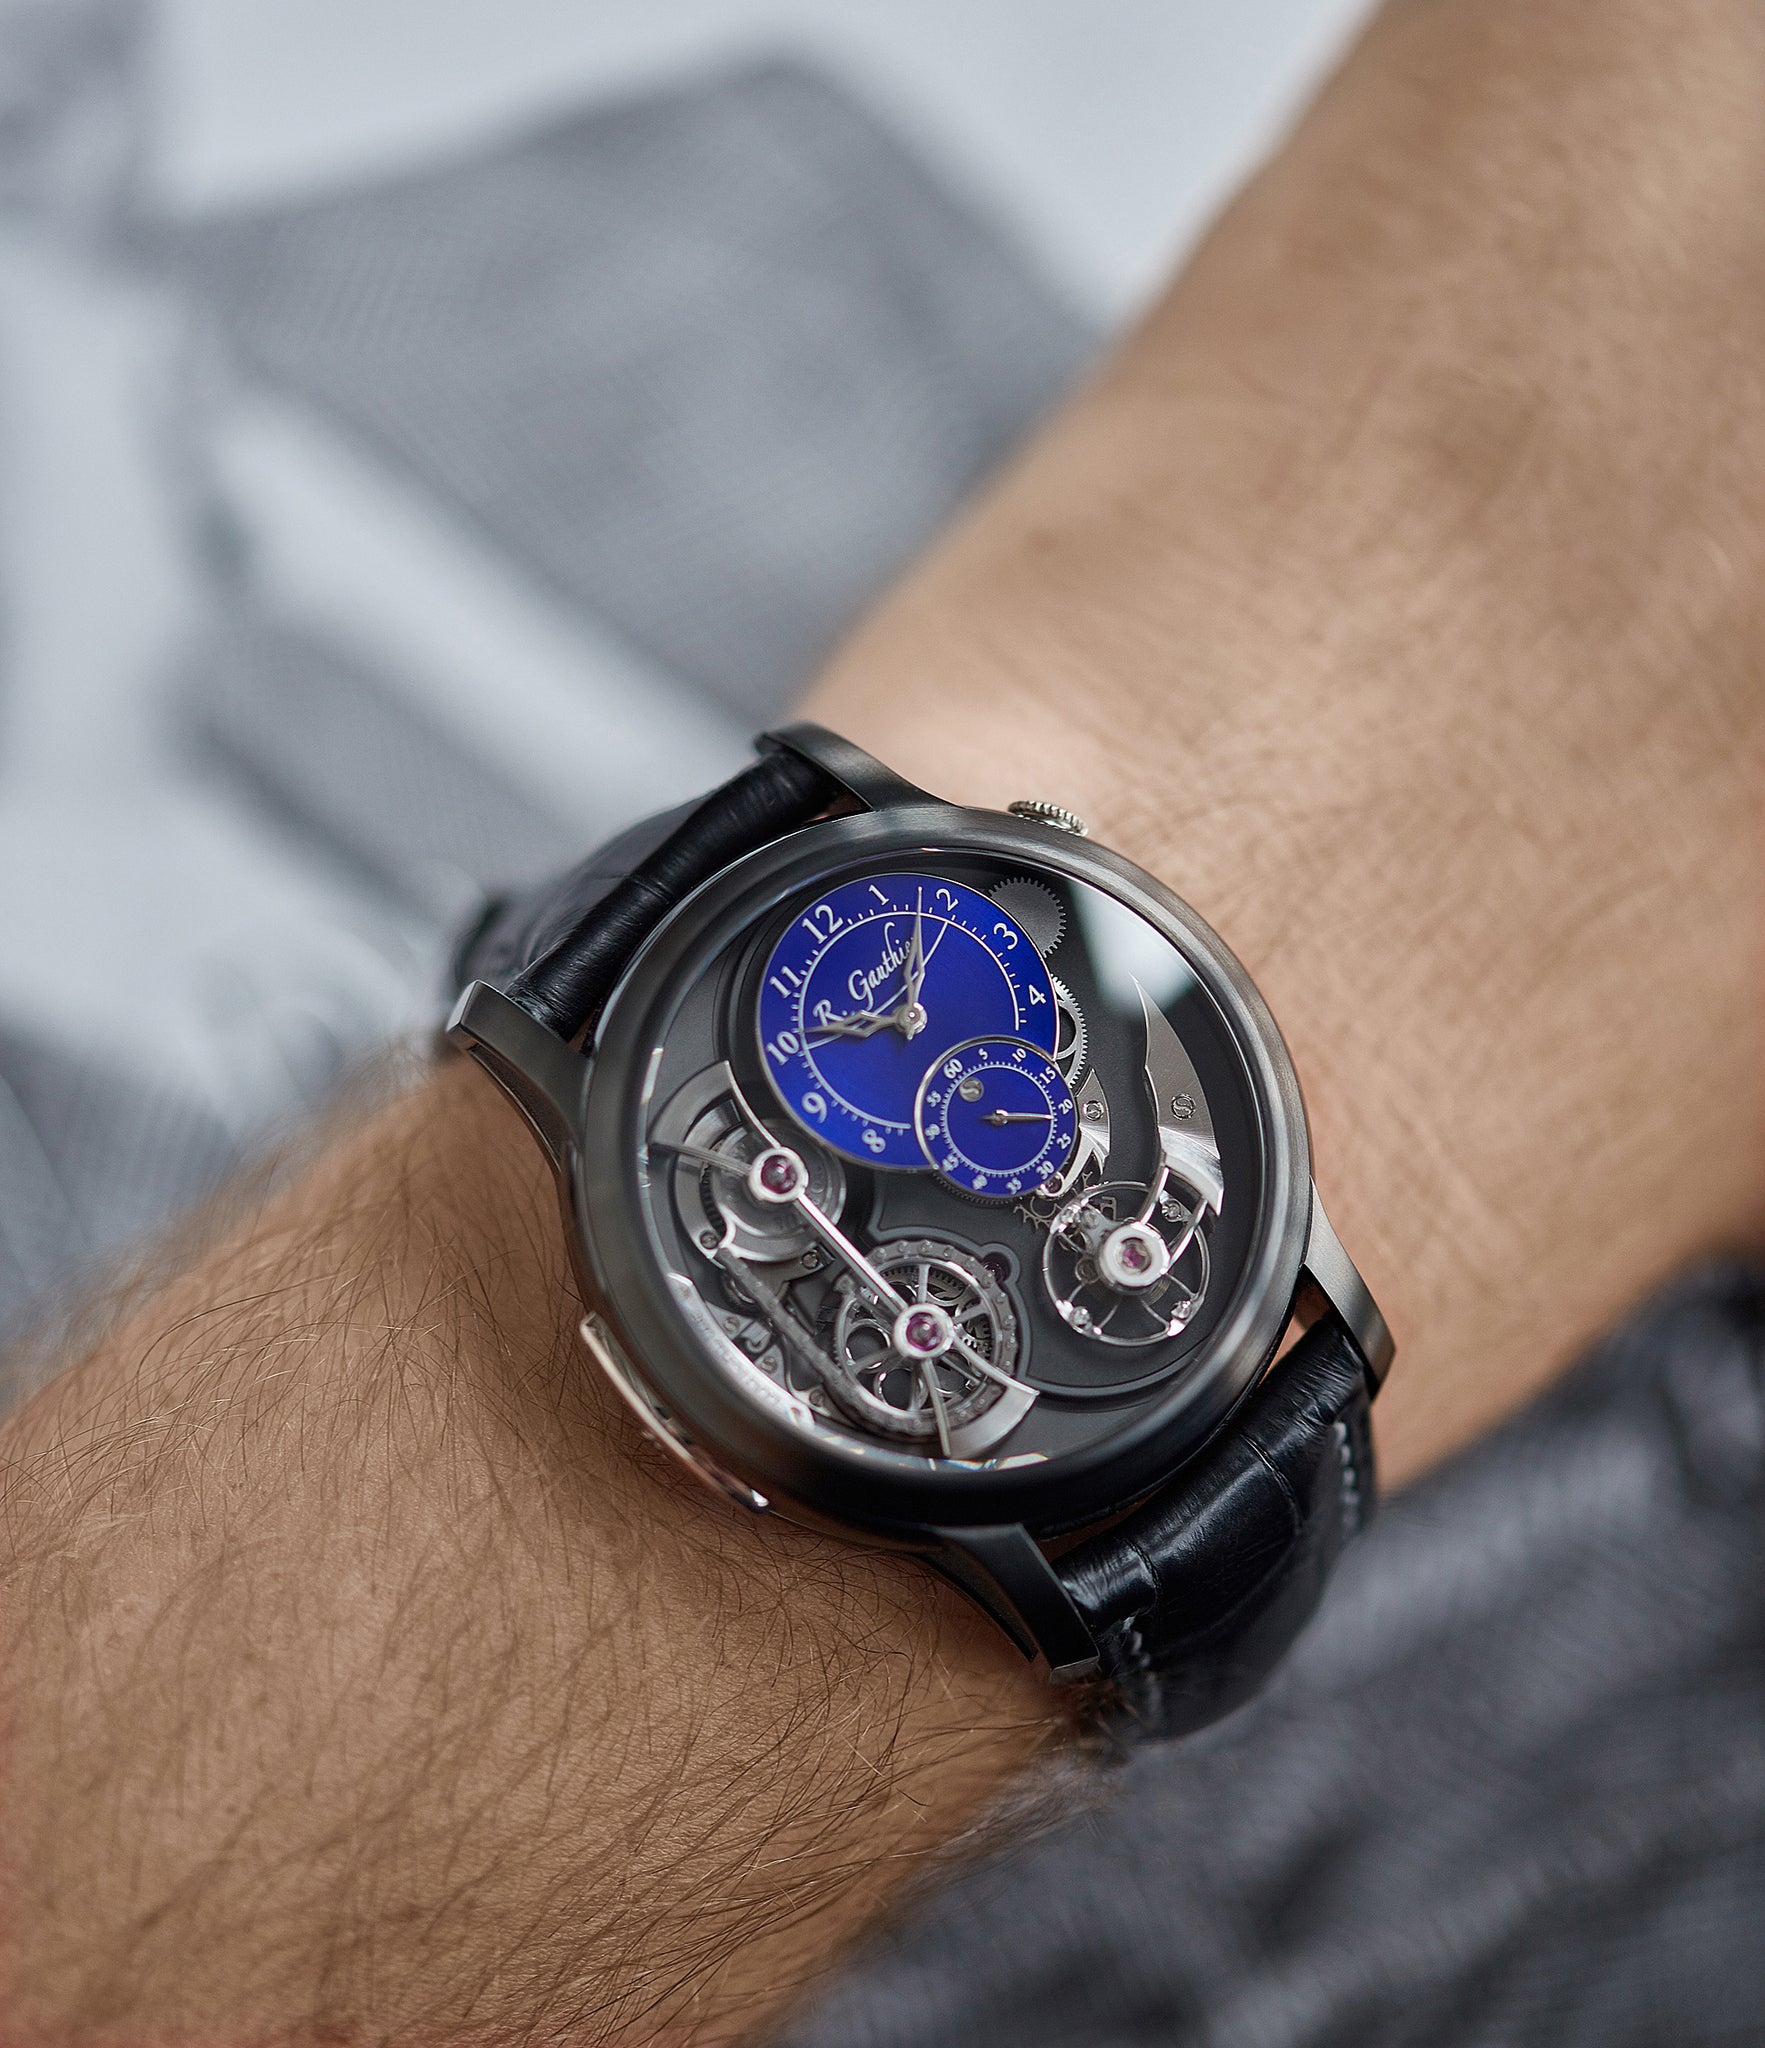 pre-owned Romain Gauthier Limited Edition Logical One BTG titanium watch blue enamel dial for sale online at A Collected Man London UK specialist of independent watchmakers